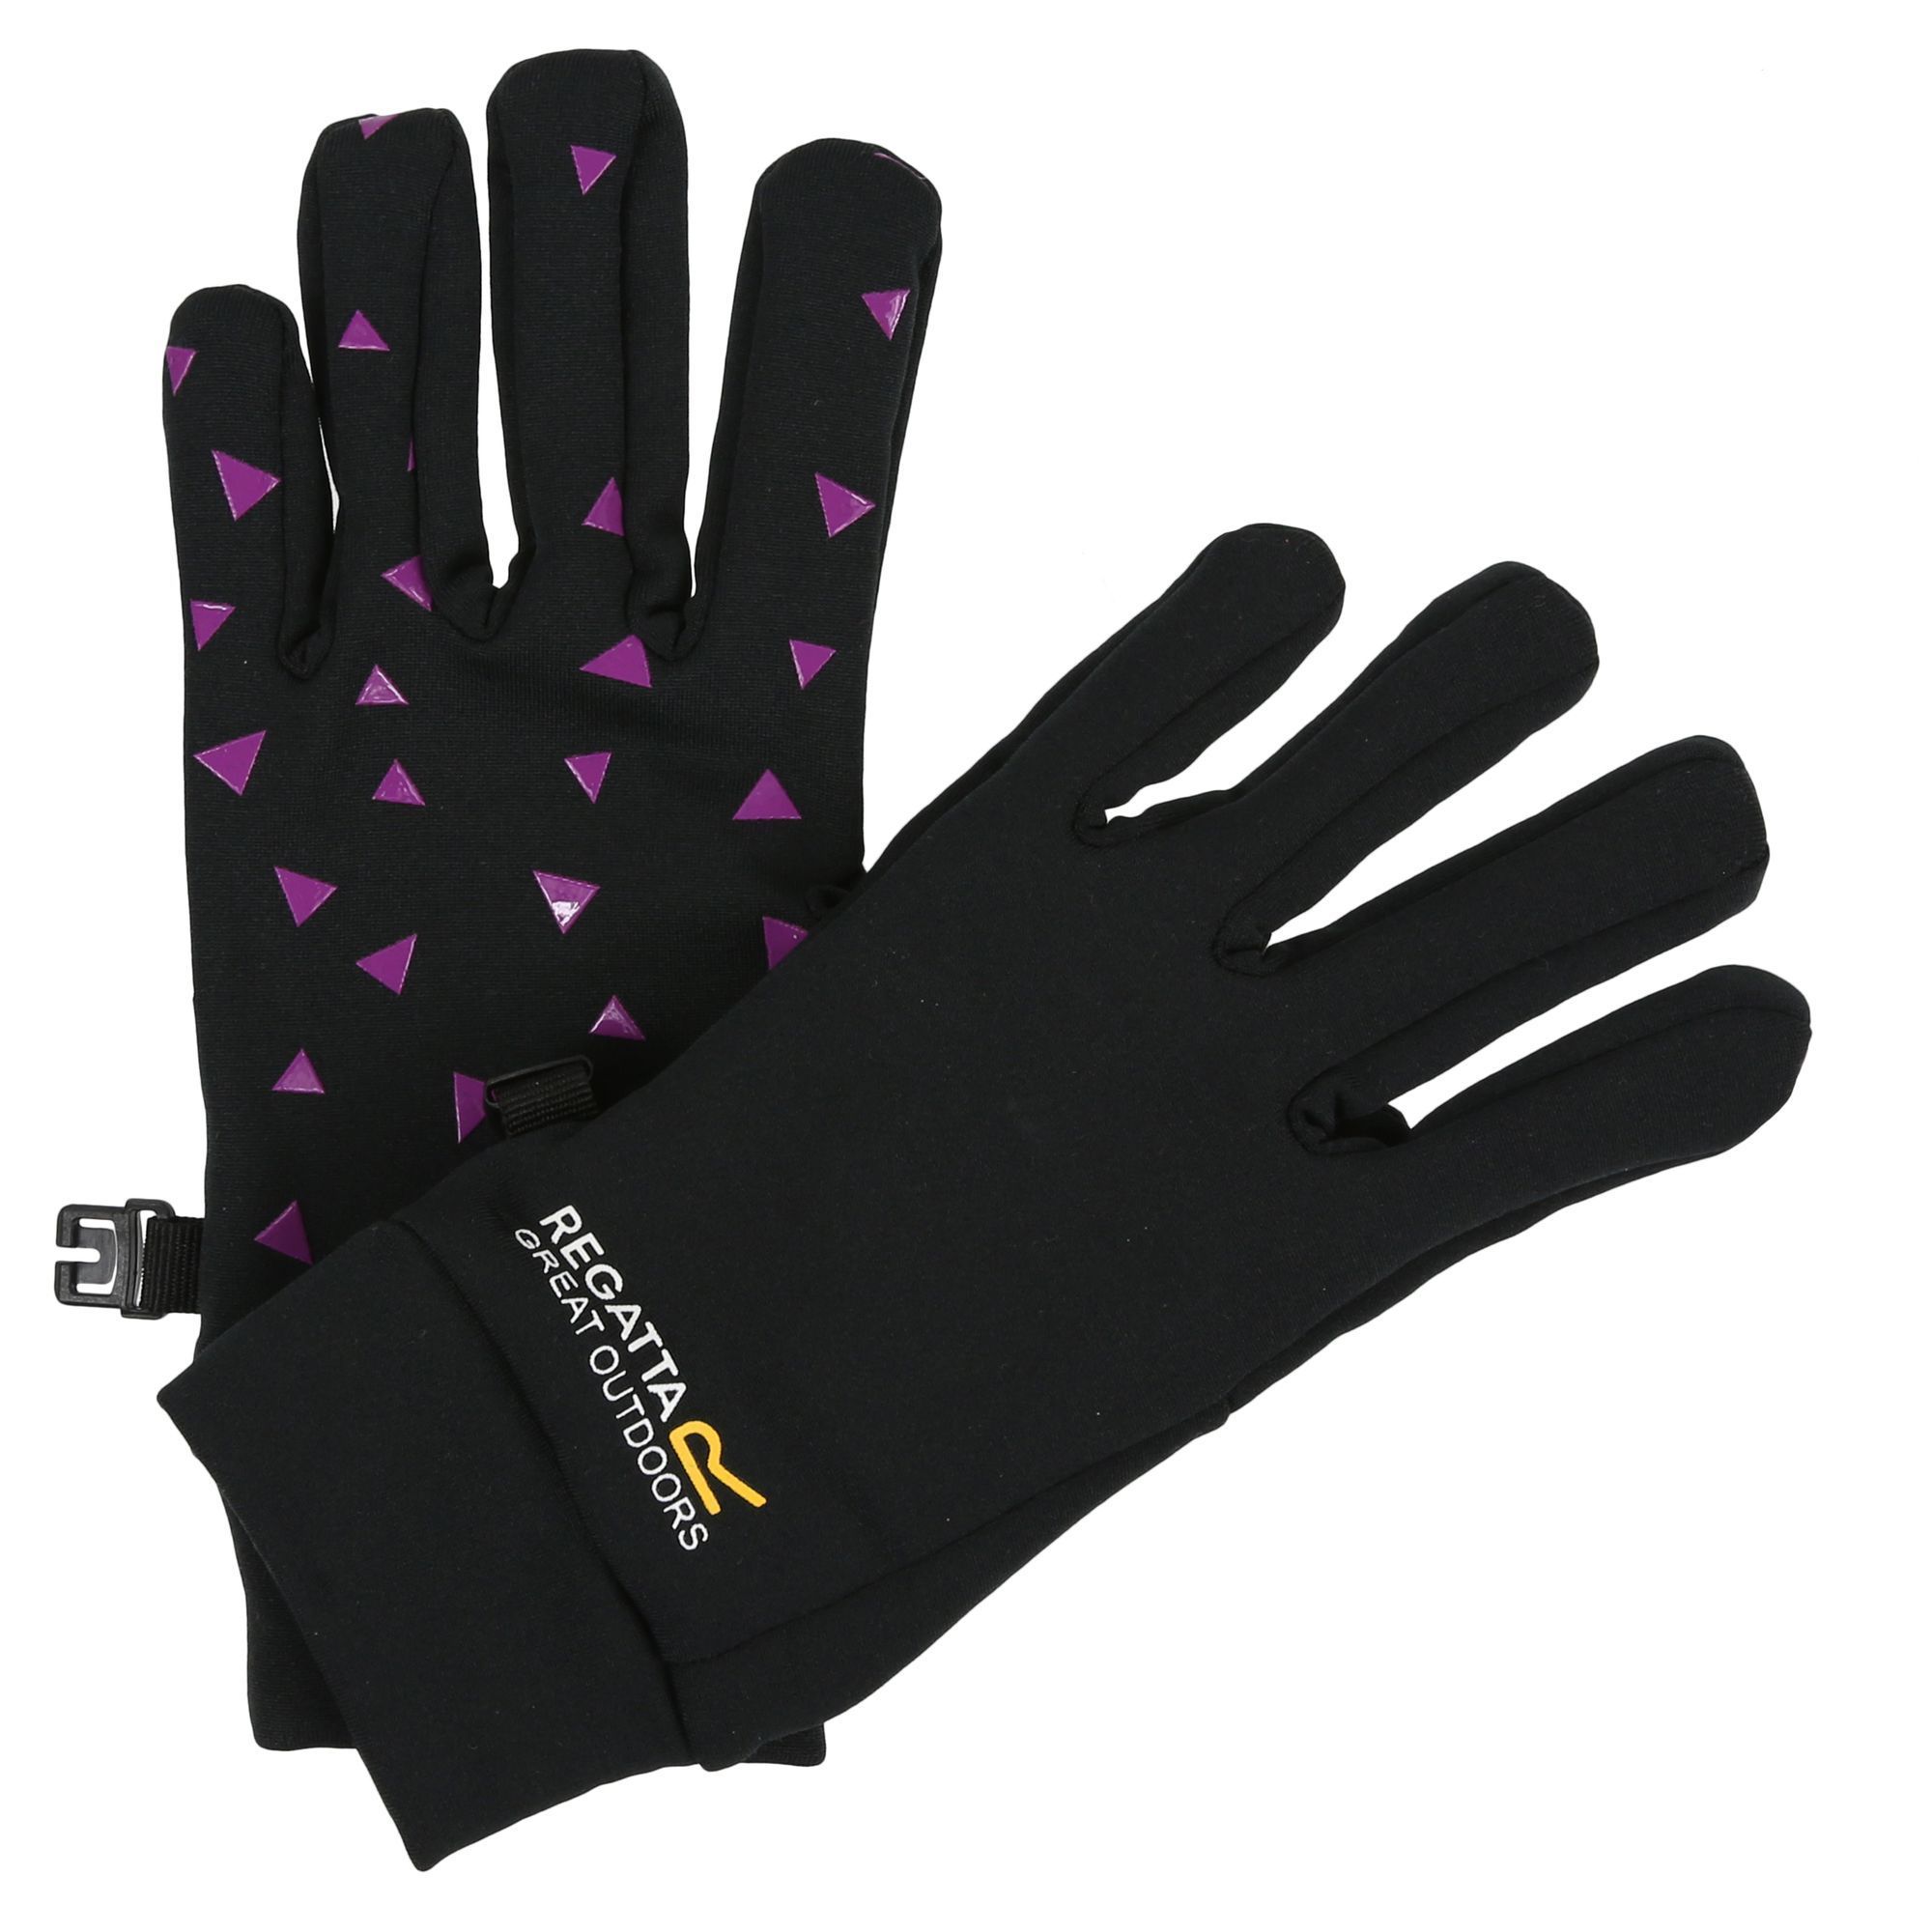 The kids Grippy Gloves use soft and stretchy fabric with high-grip rubber palms to keep hands warm without restricting their movement. 95% Polyester, 5% Elastane.